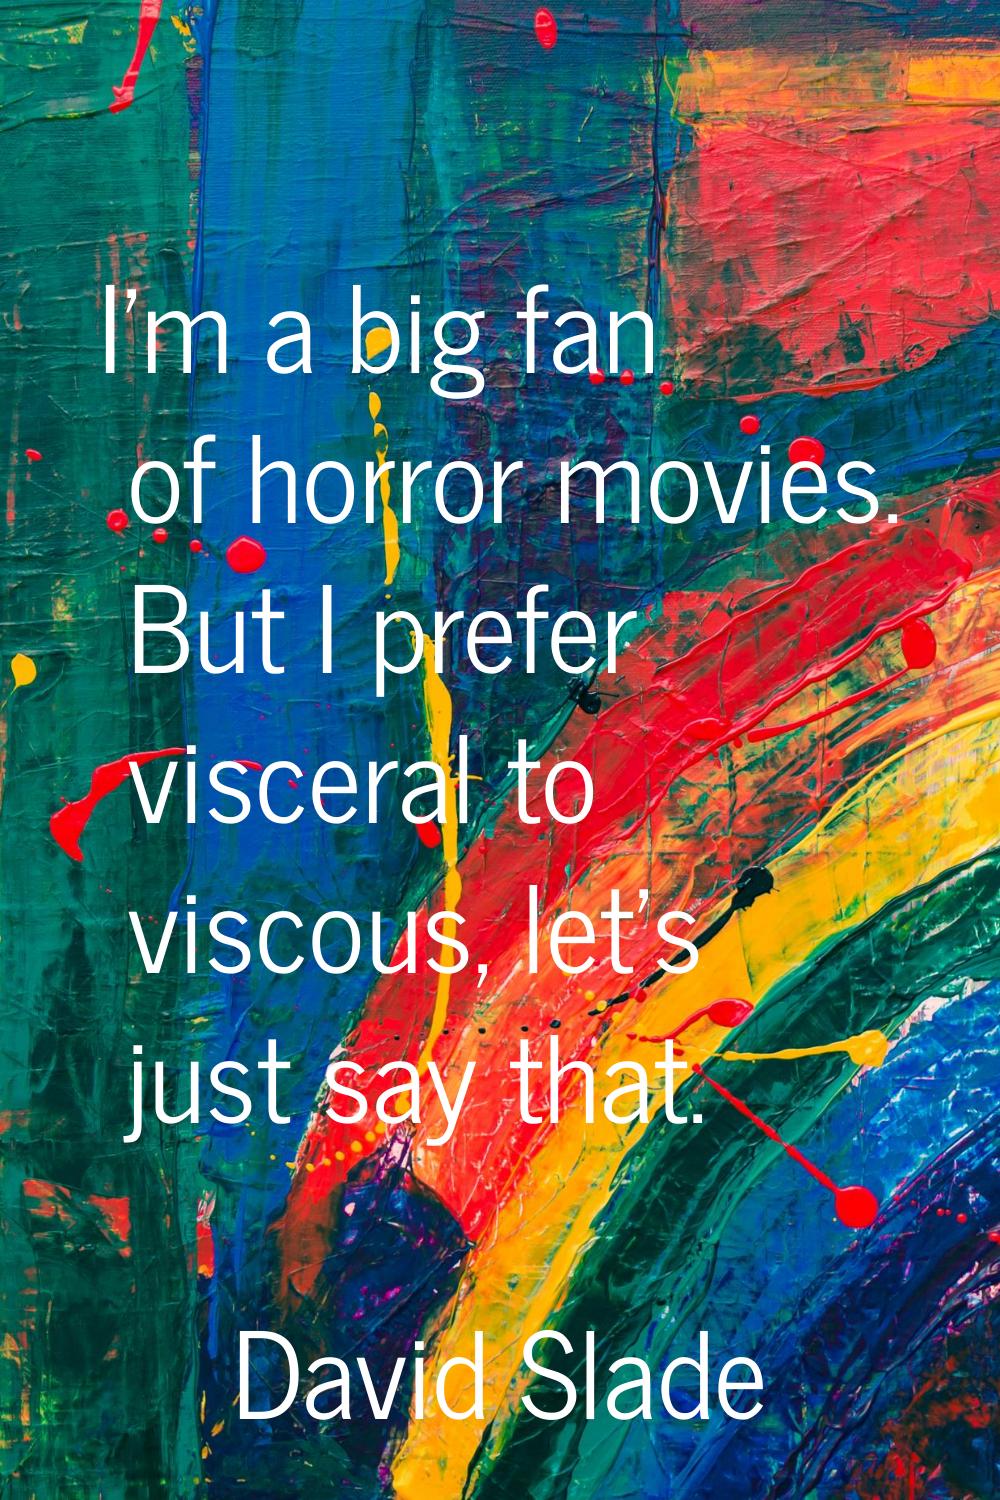 I'm a big fan of horror movies. But I prefer visceral to viscous, let's just say that.